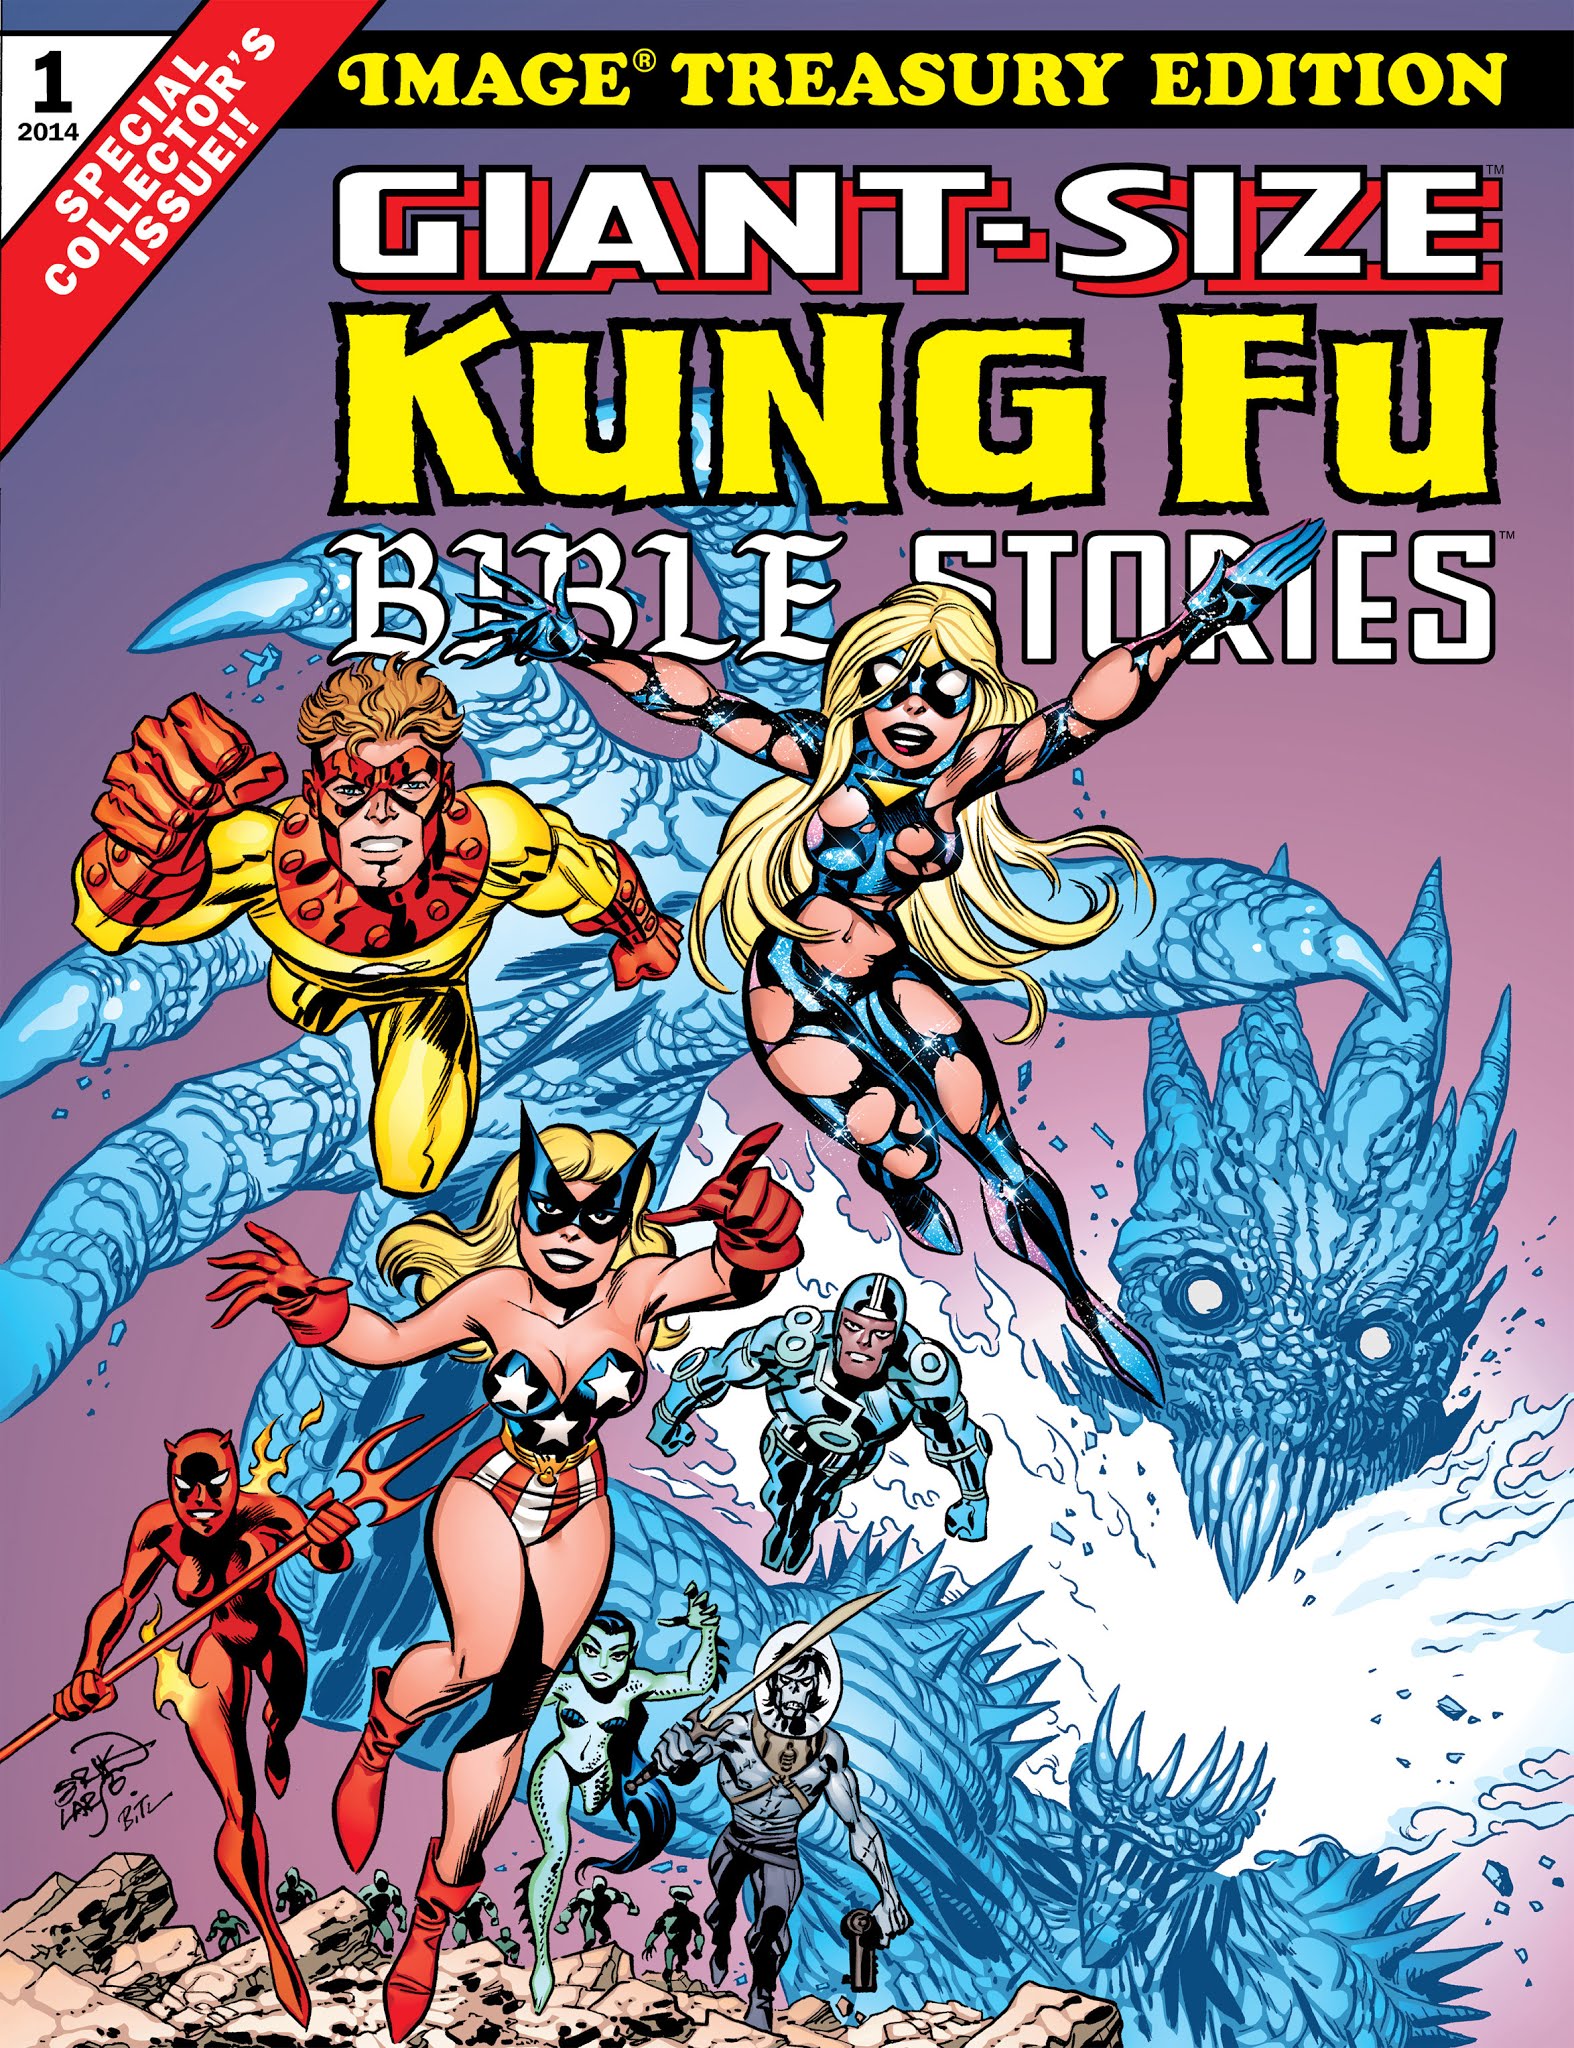 Read online Giant-Size Kung Fu Bible Stories comic -  Issue # Full - 1